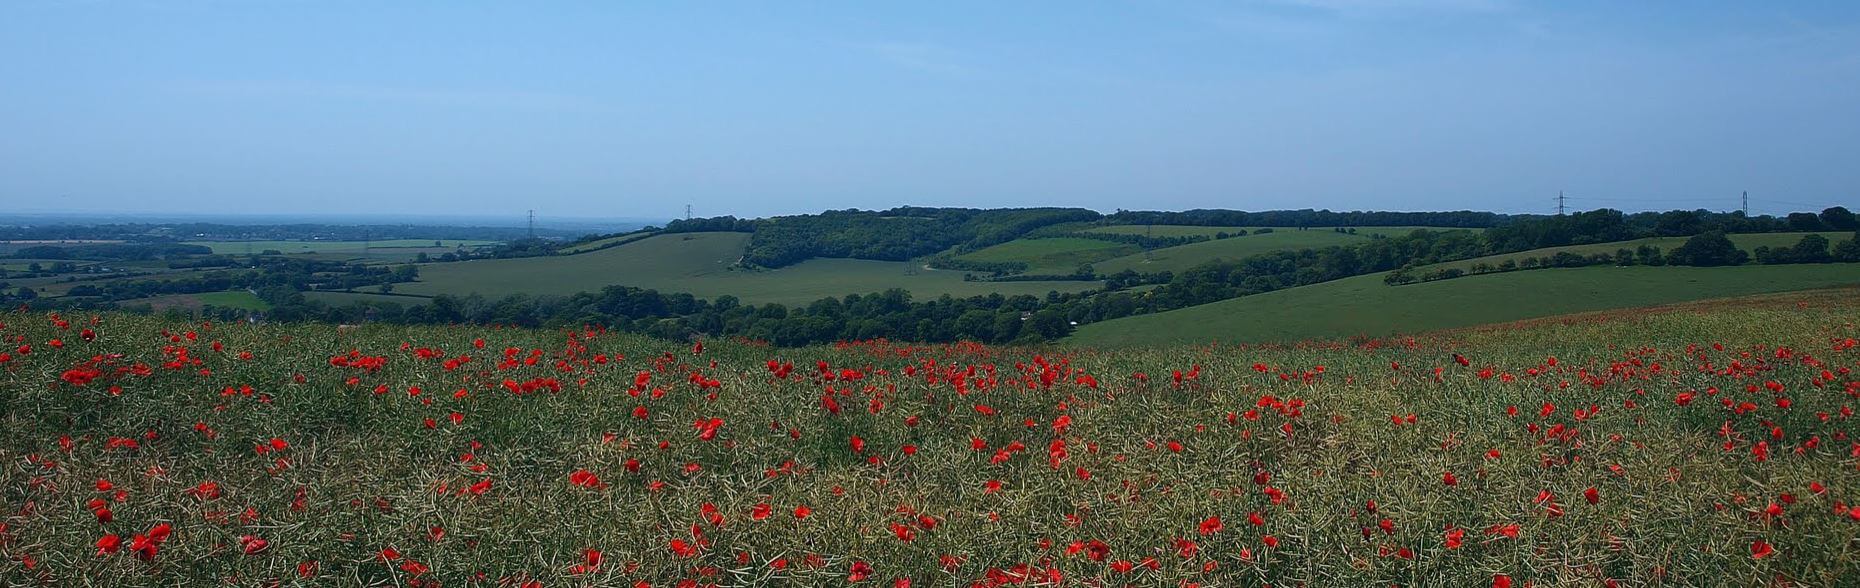 Field of poppies and green fields in distance.